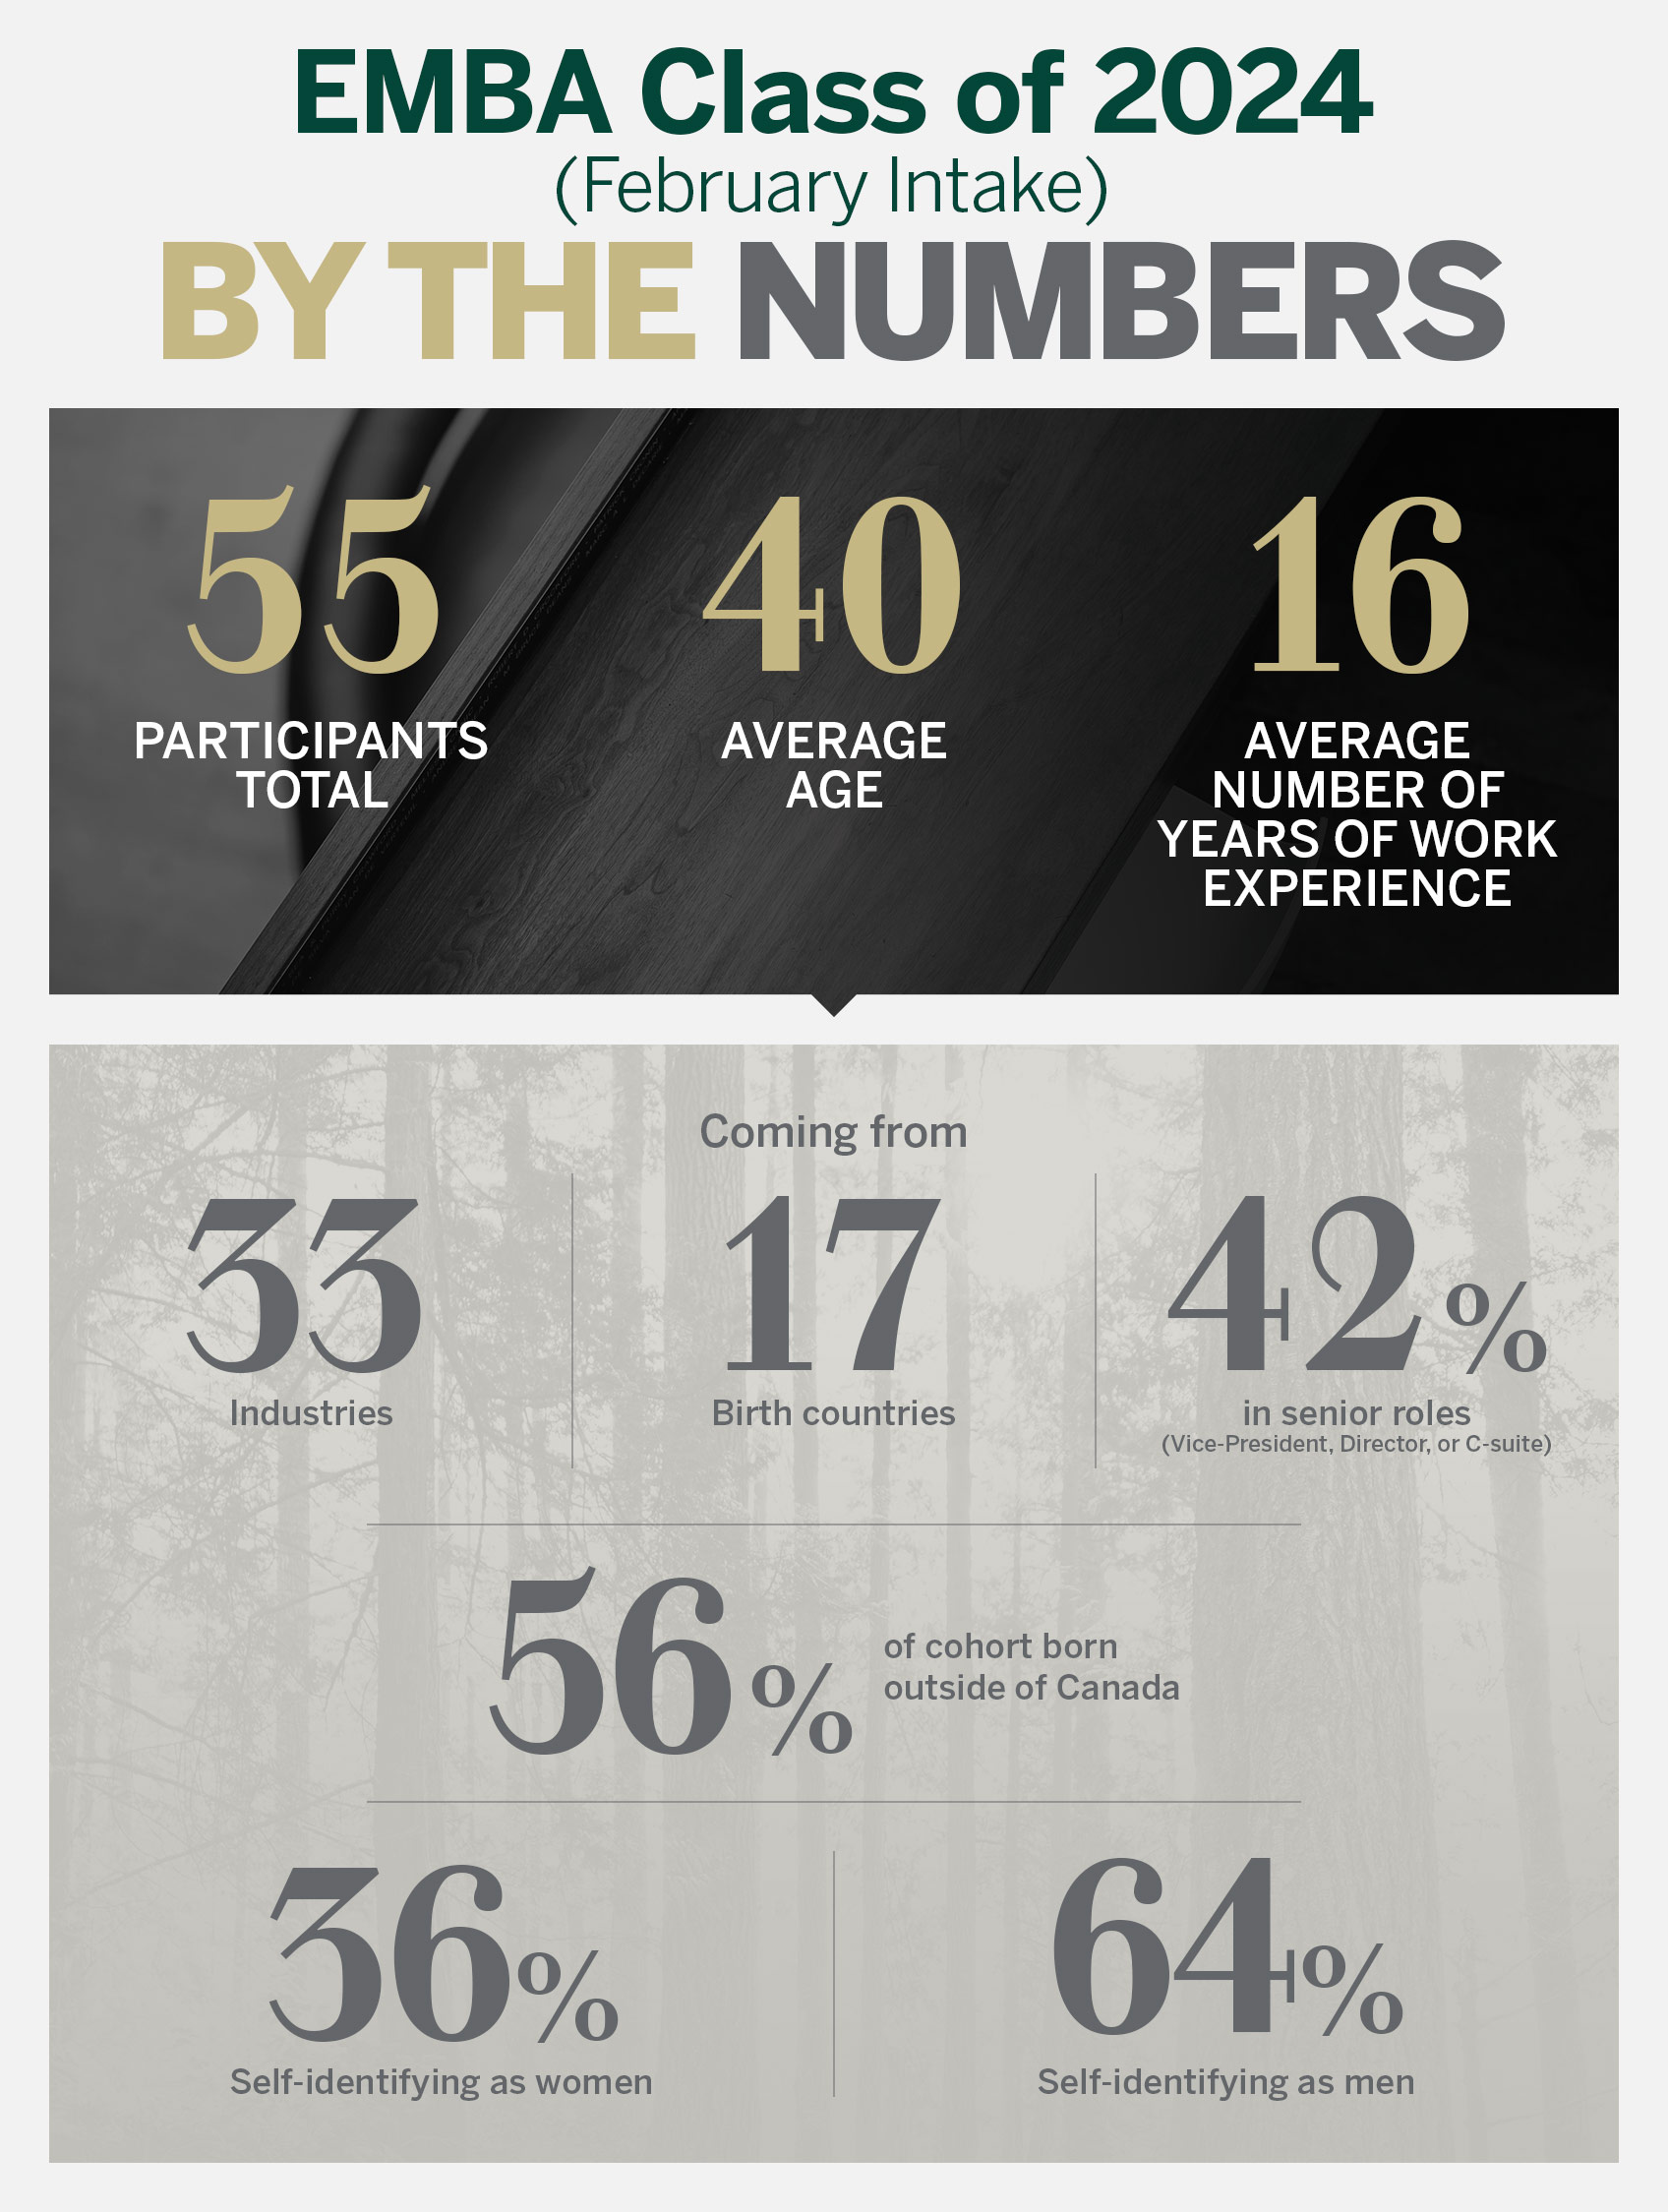 EMBA Class of 2024 (February intake) By the Numbers